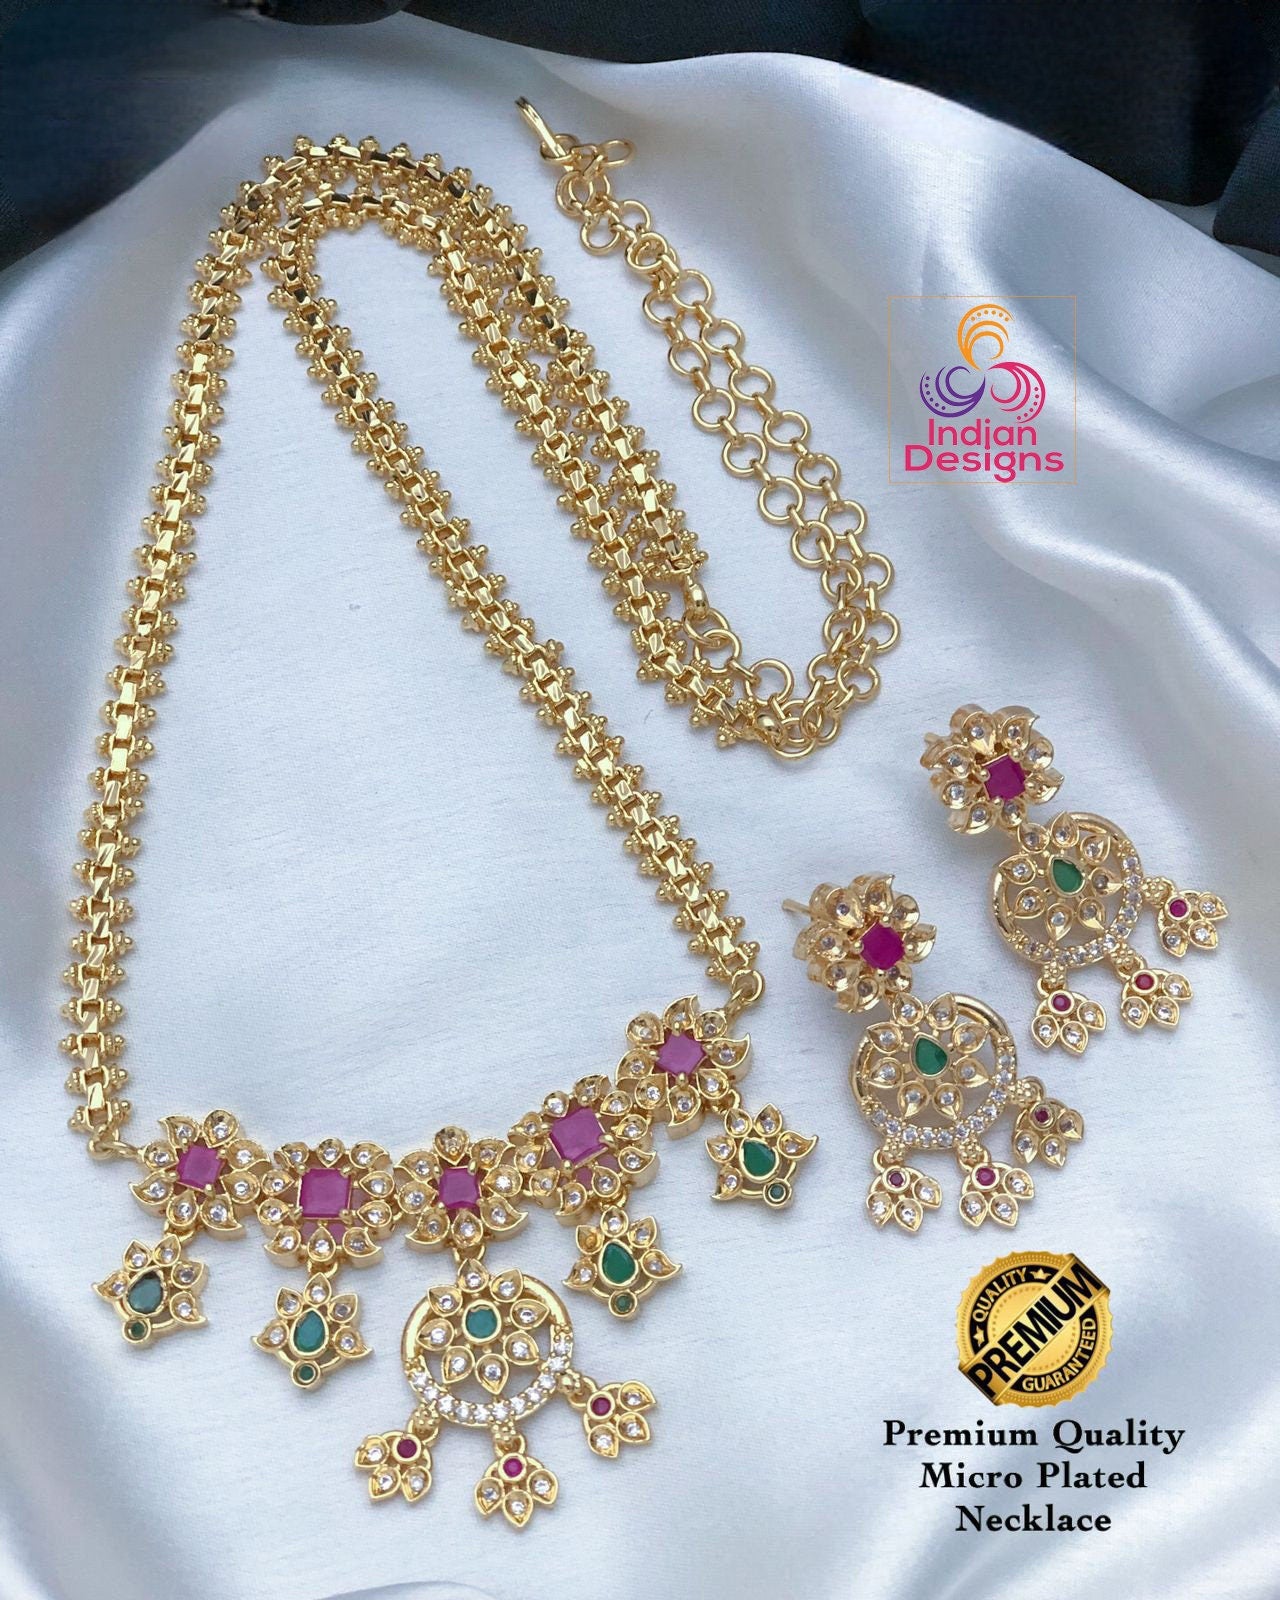 22K Gold Plated Haram necklace and earring set with floral design|Traditional South Indian Jewelry|Bollywood Style CZ American Diamond Set